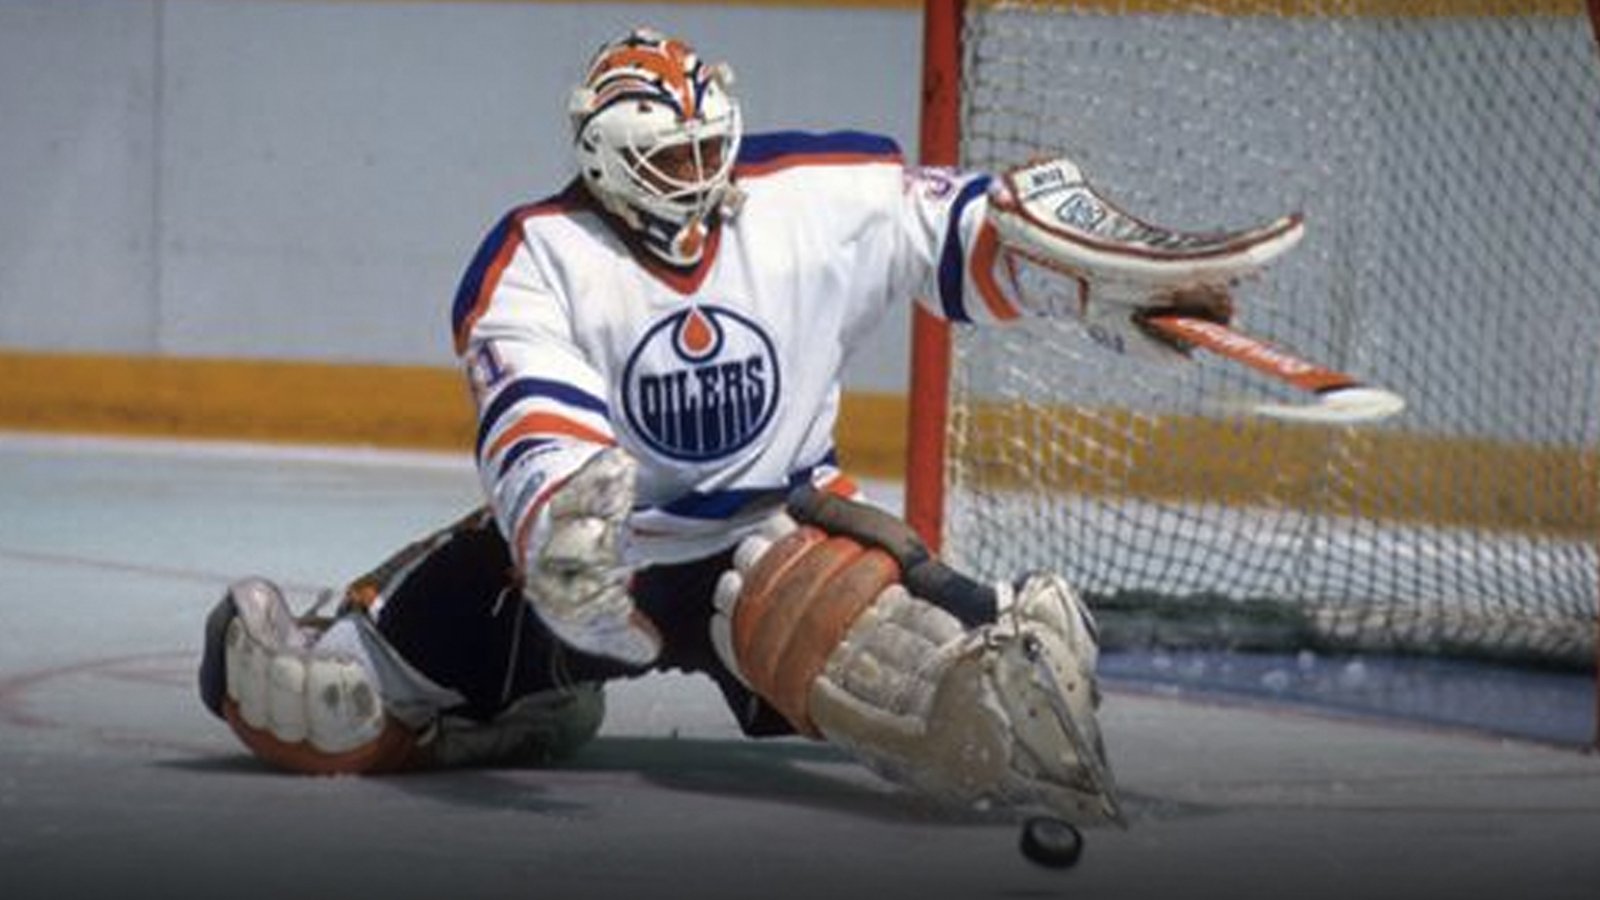 Breaking: Grant Fuhr comes to the defense of Montoya amidst media controversy